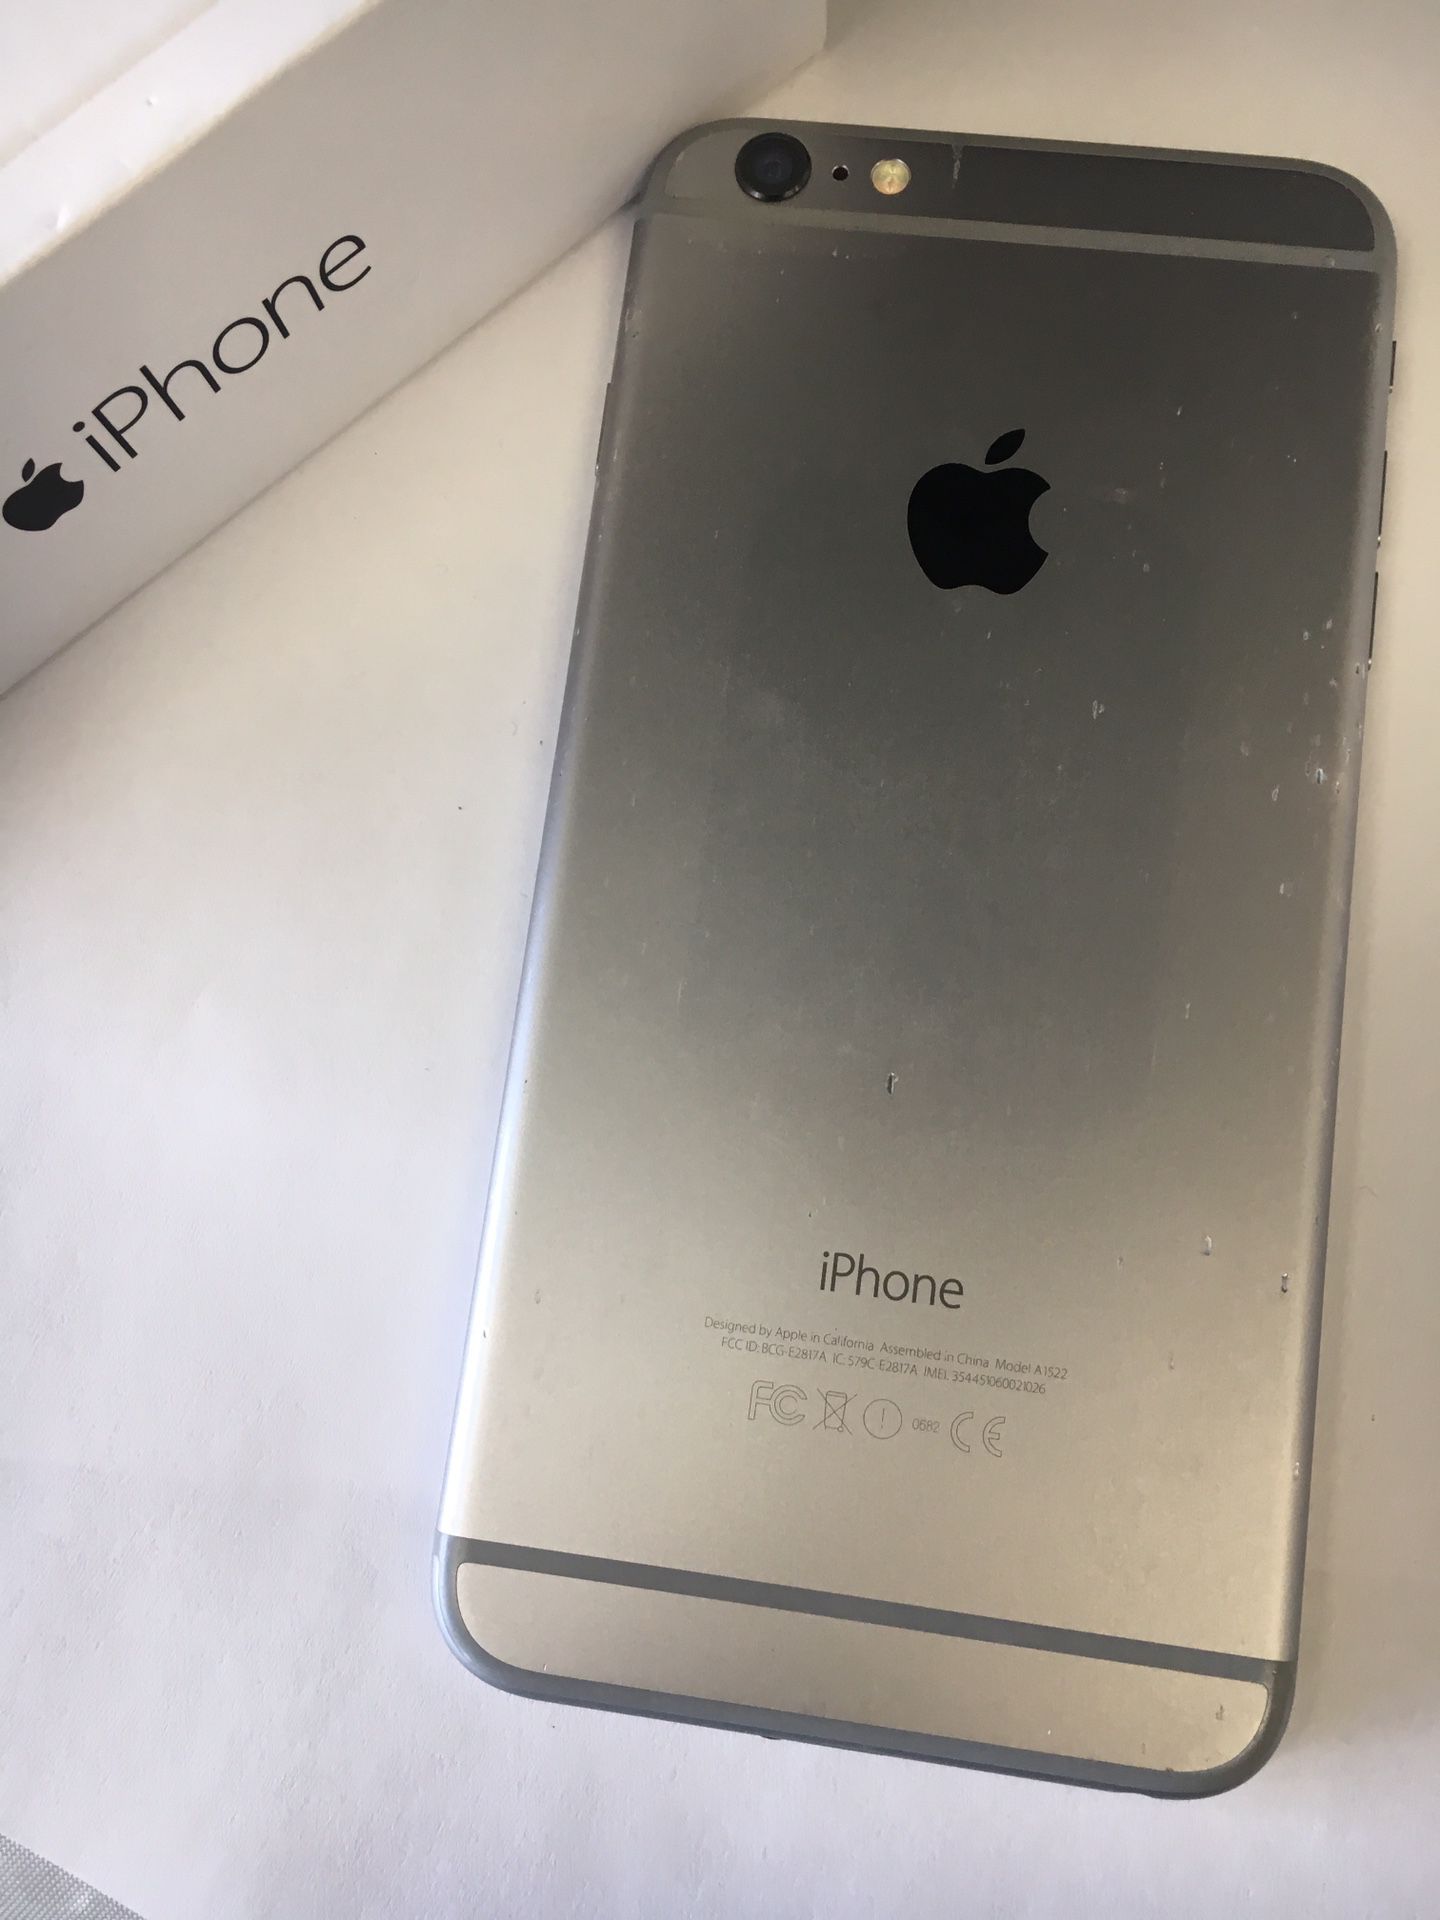 IPhone 6 Plus excellent condition factory unlocked comes with charger